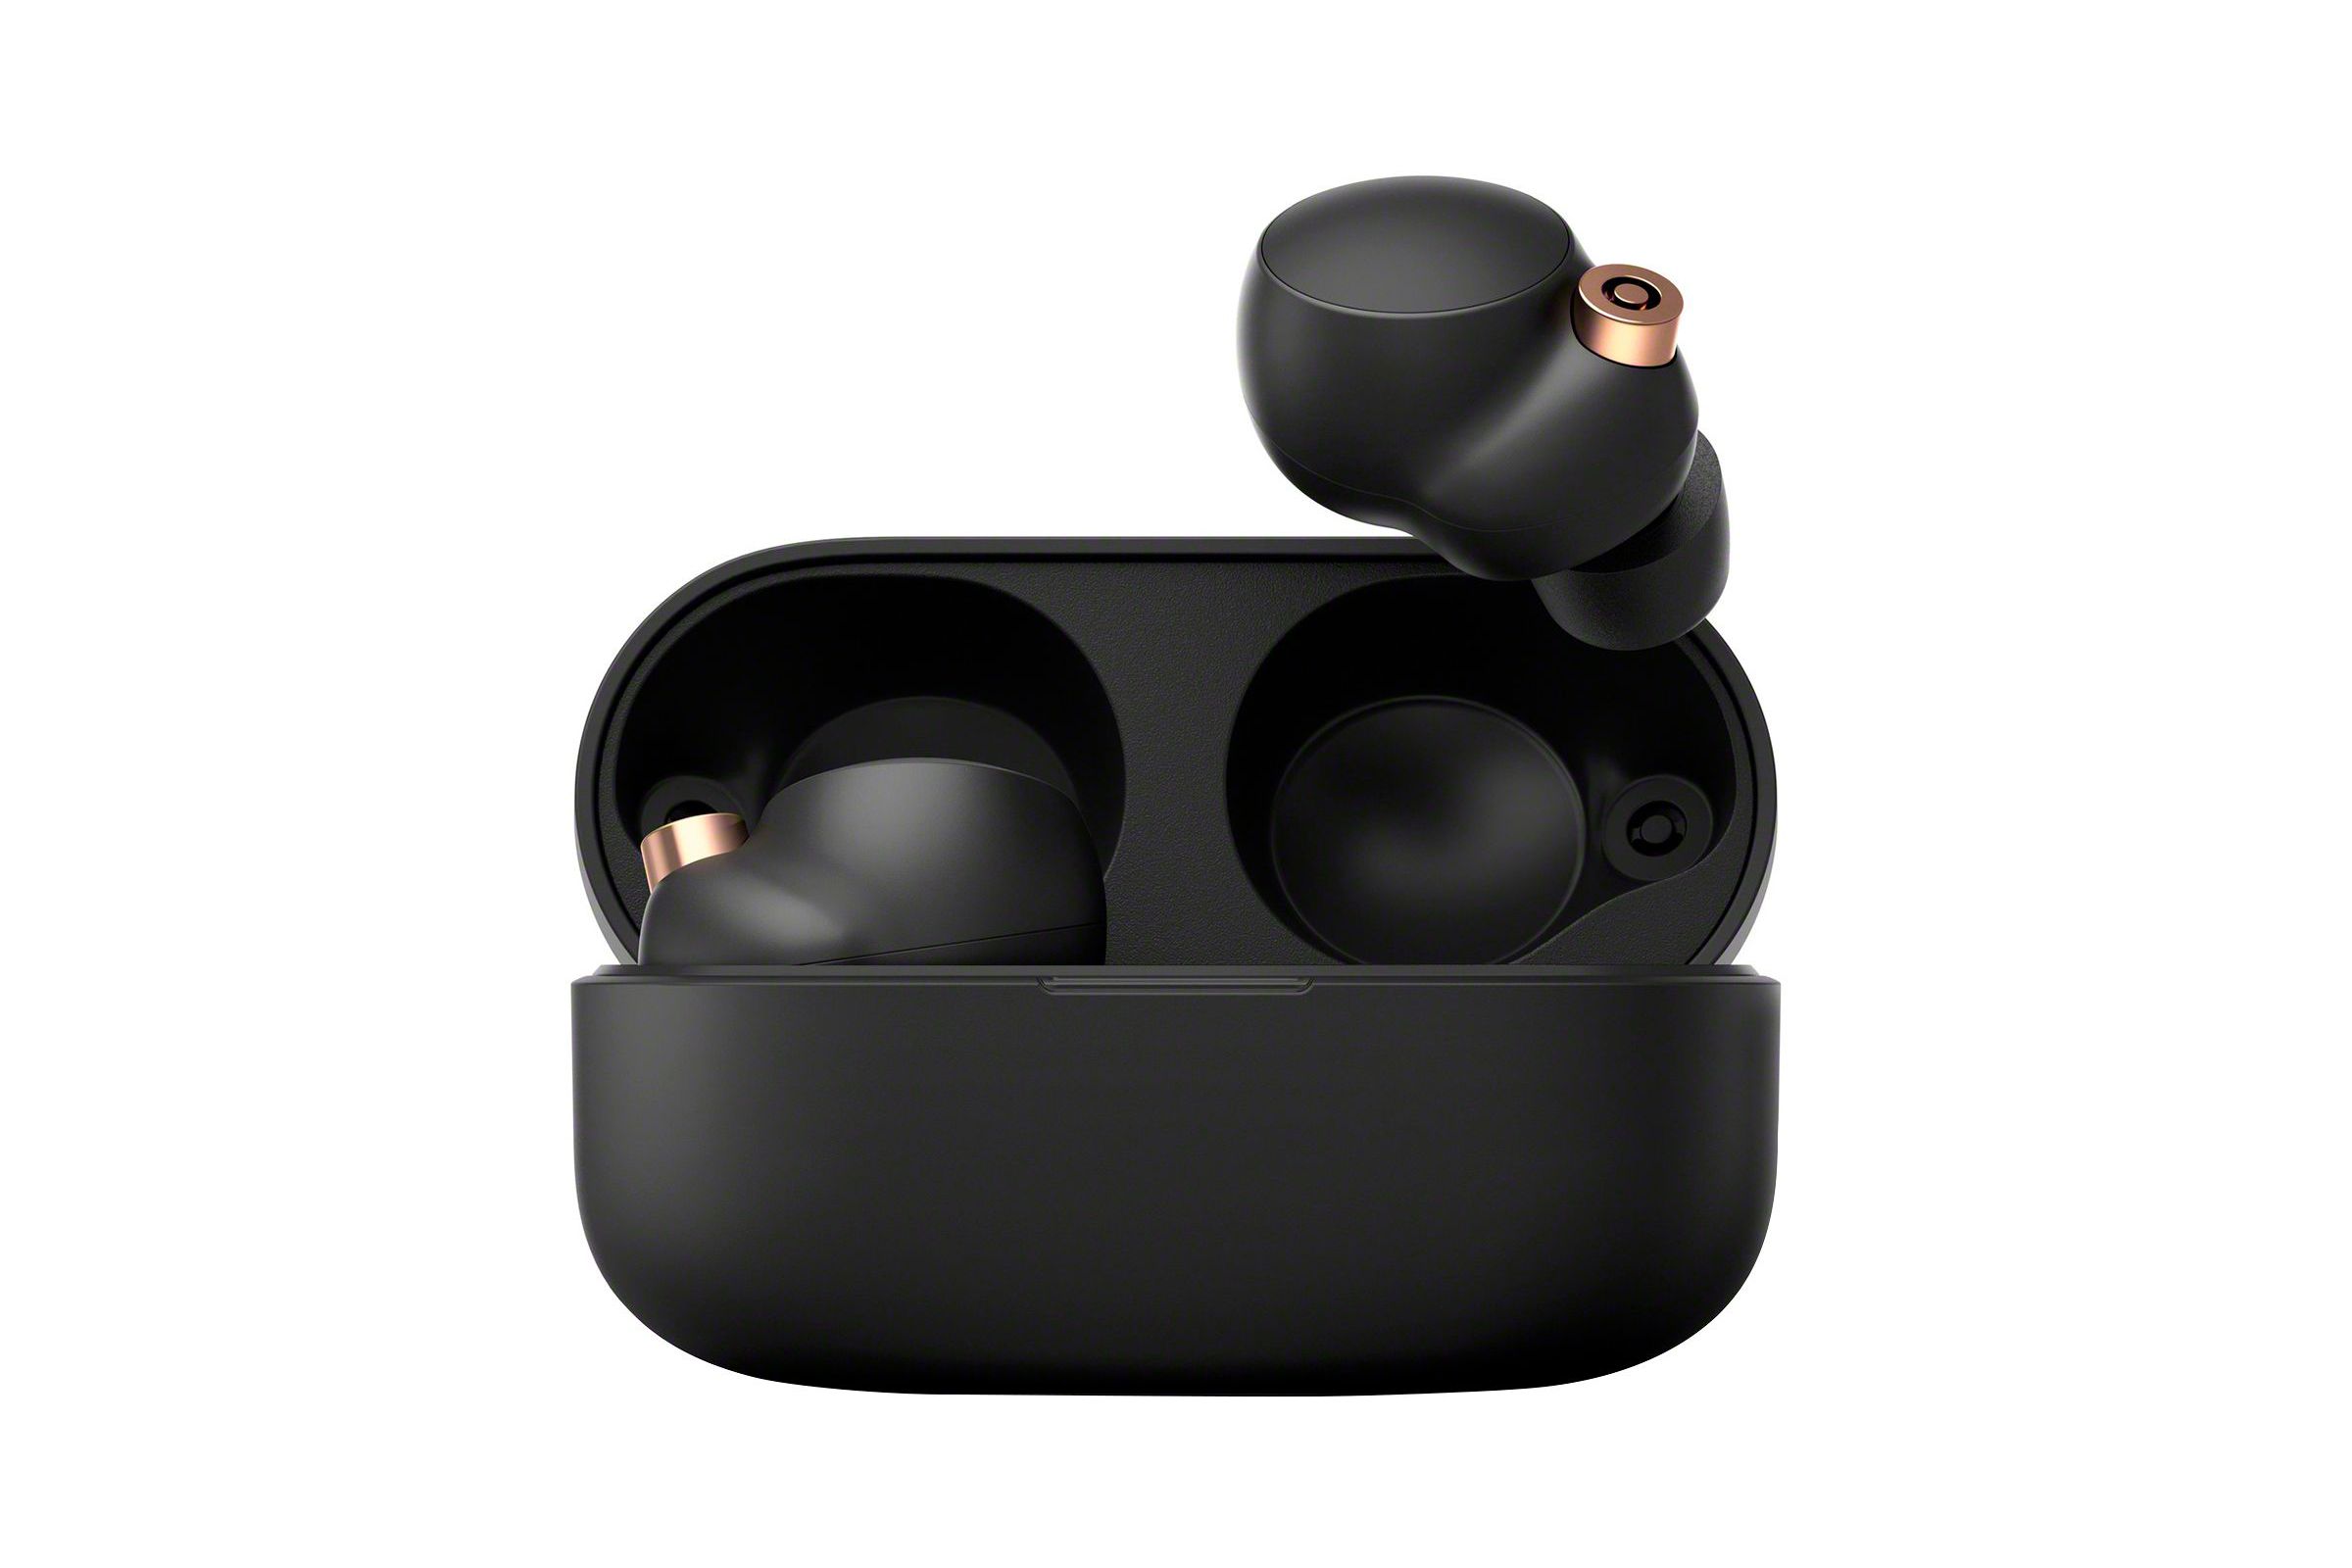 The renders show the earbuds alongside their charging case.